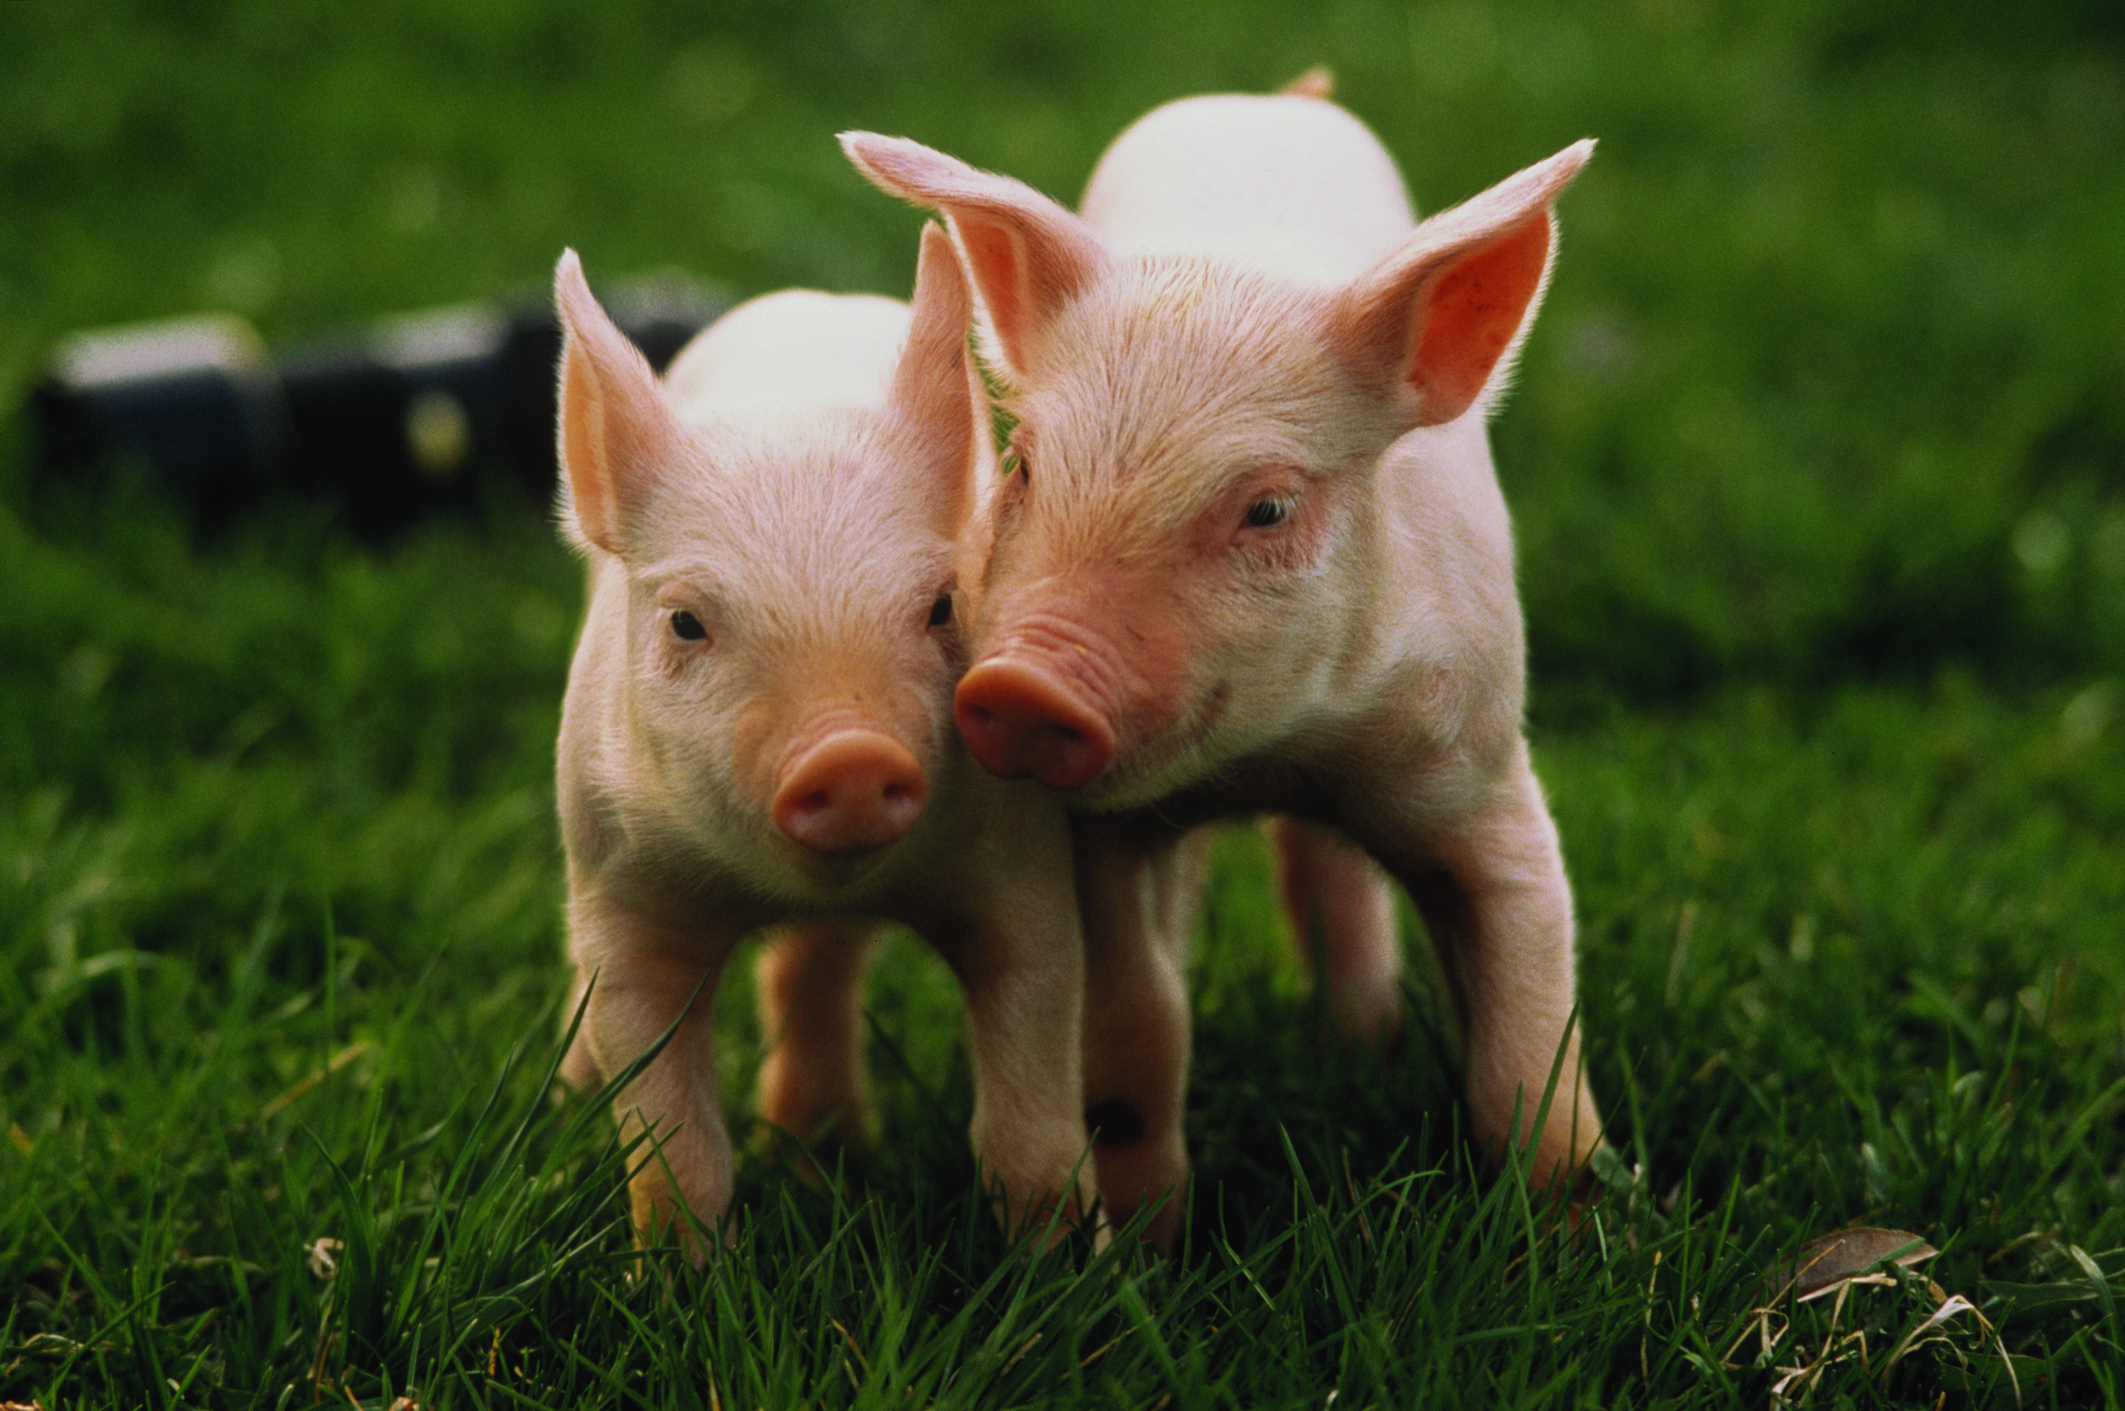 Two piglets standing on grass with a camera in the background